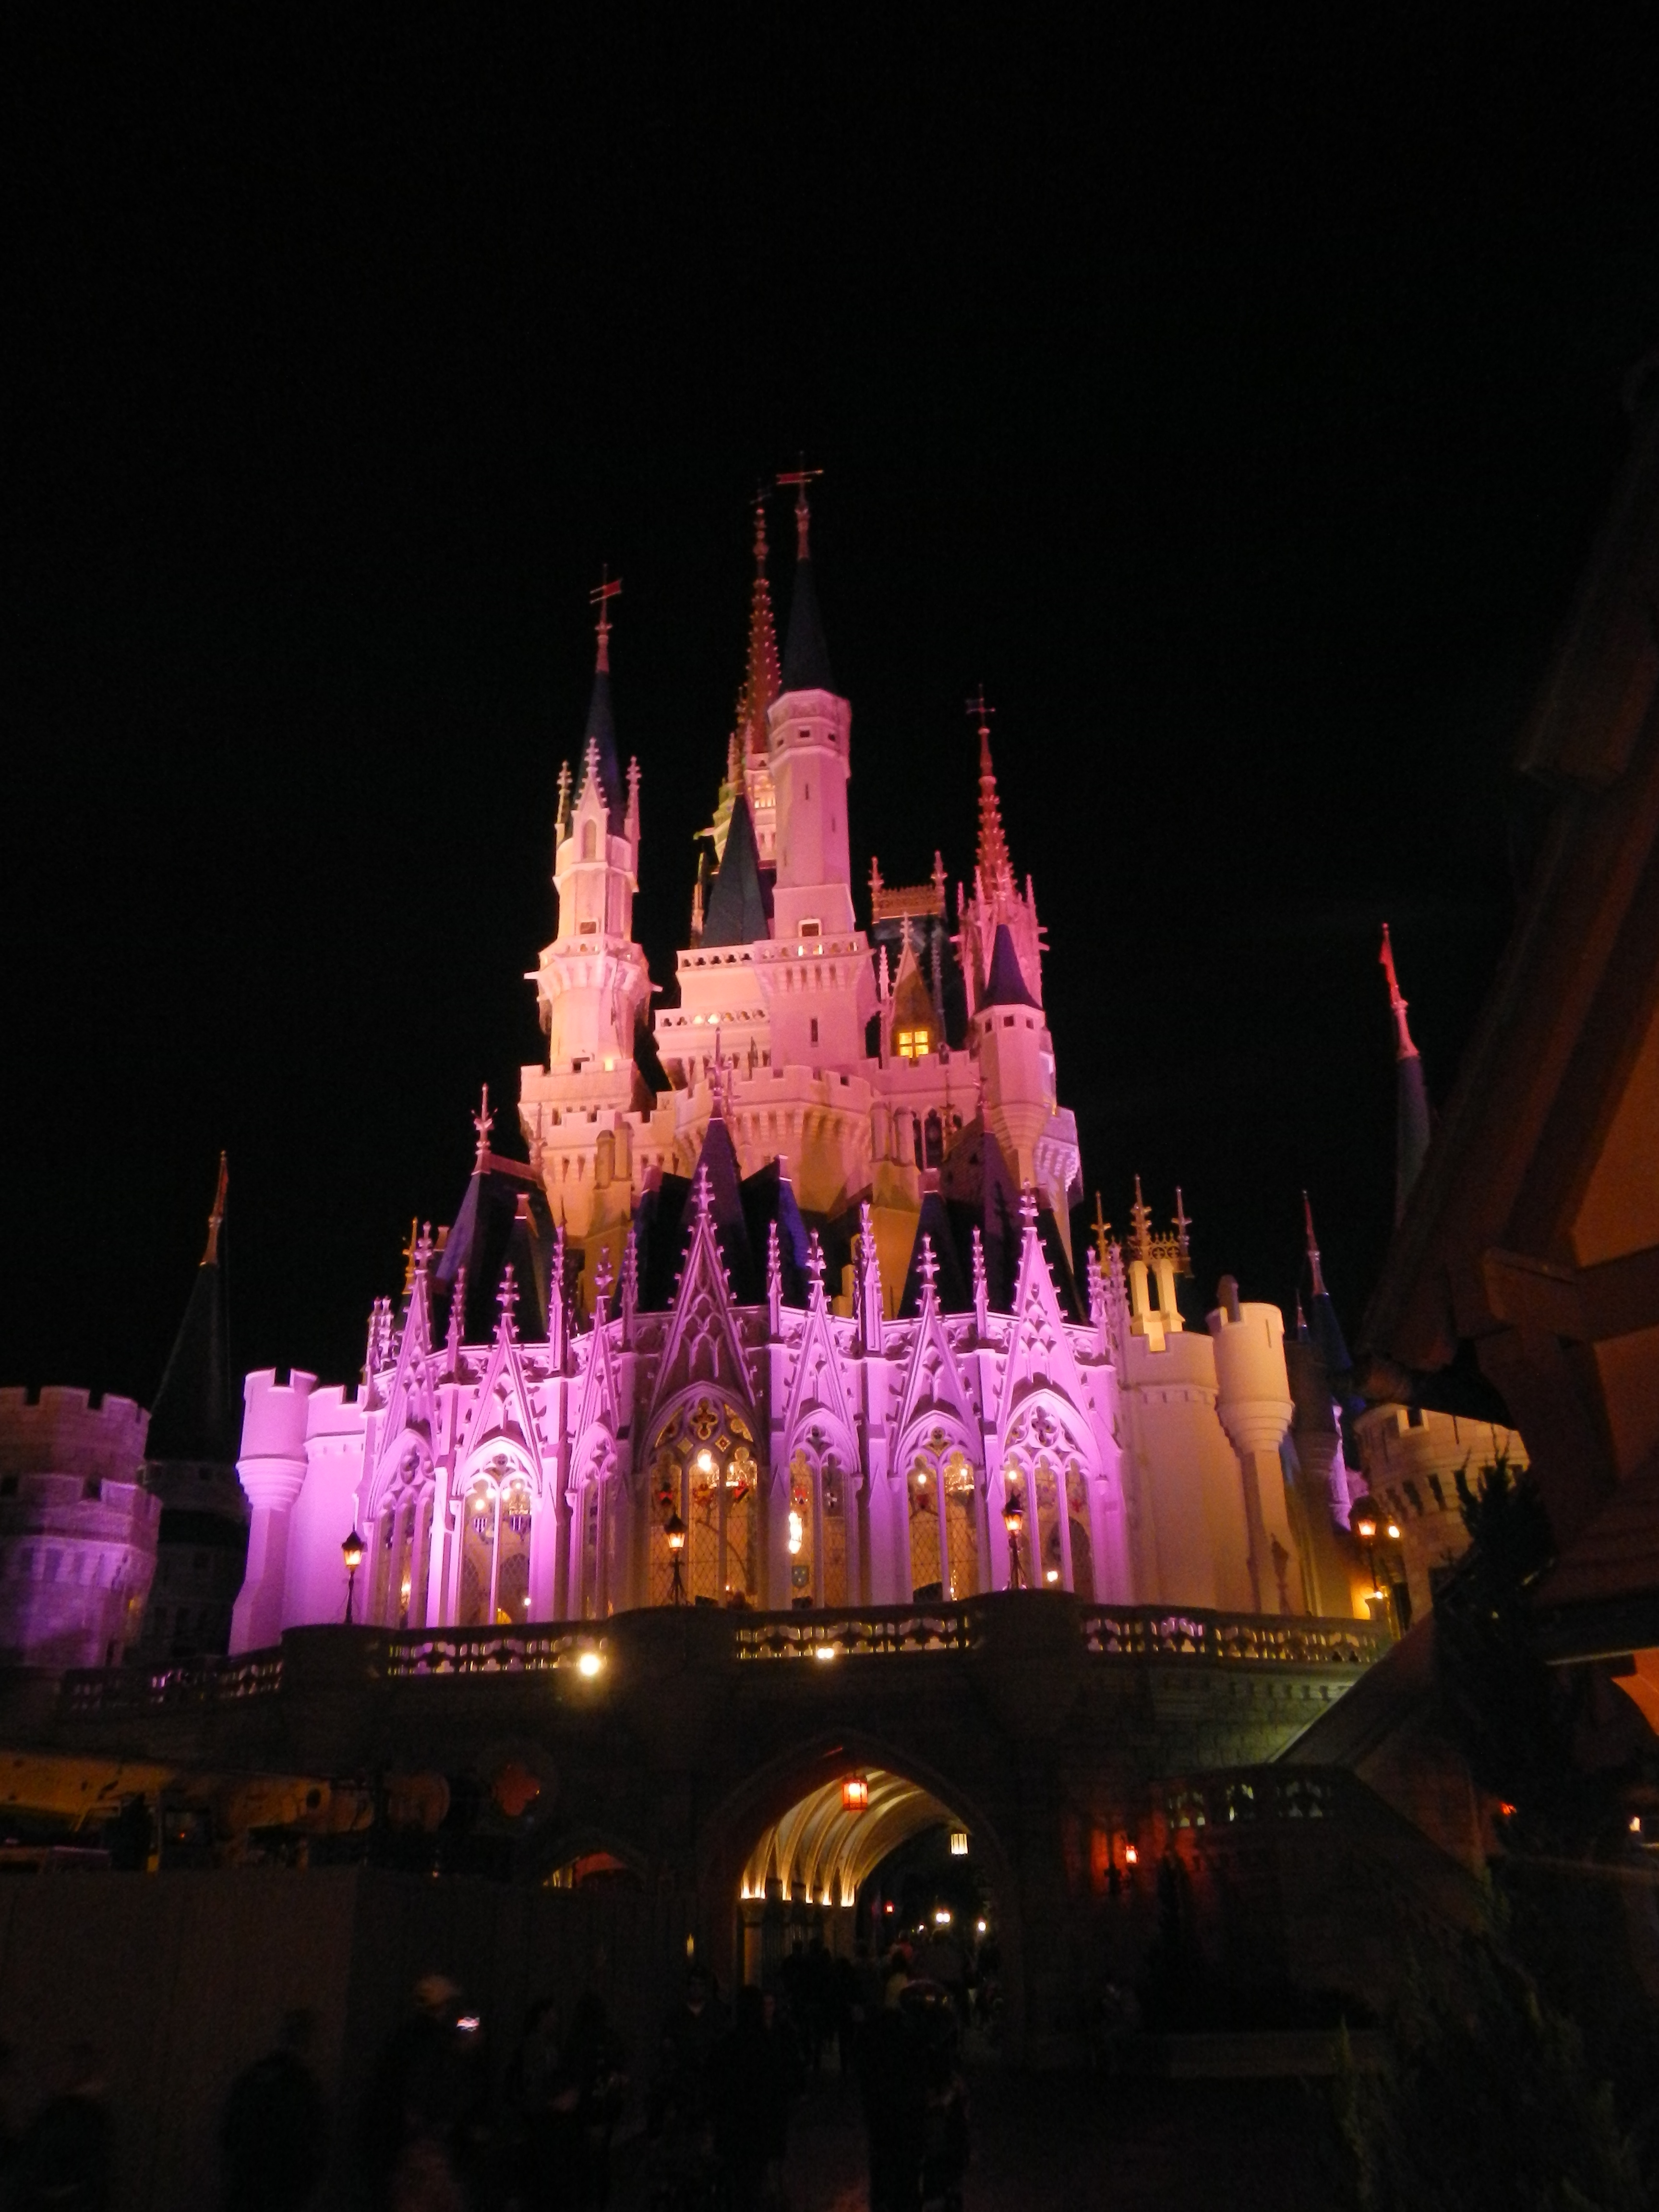 Another shot of Cinderella's Castle.